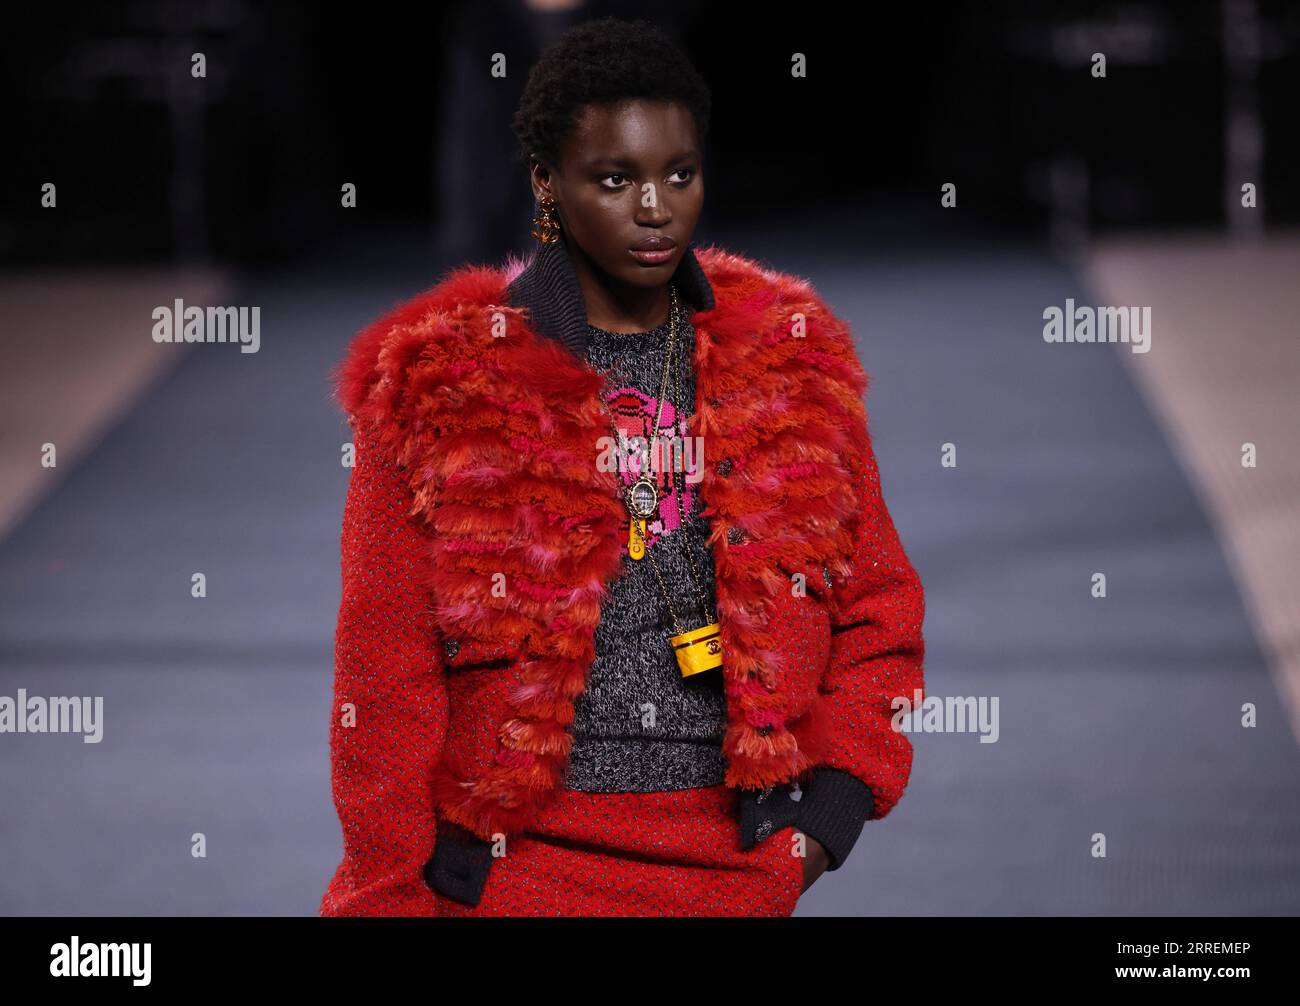 Chanel doubles down on tweeds for fall show